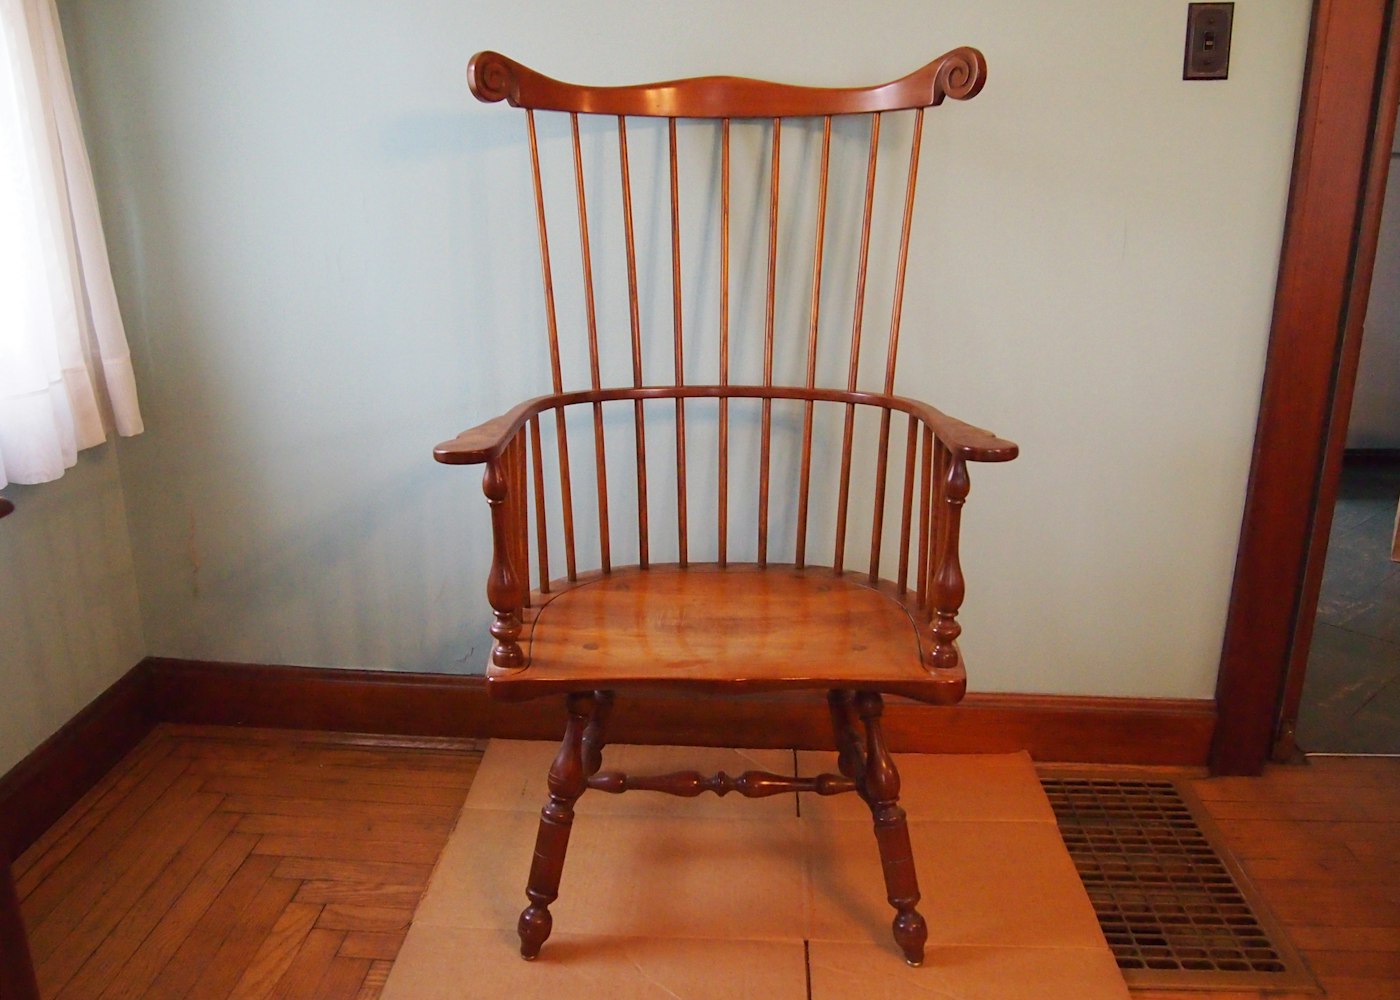 Stickley Living Room Leopold's Chair Sale